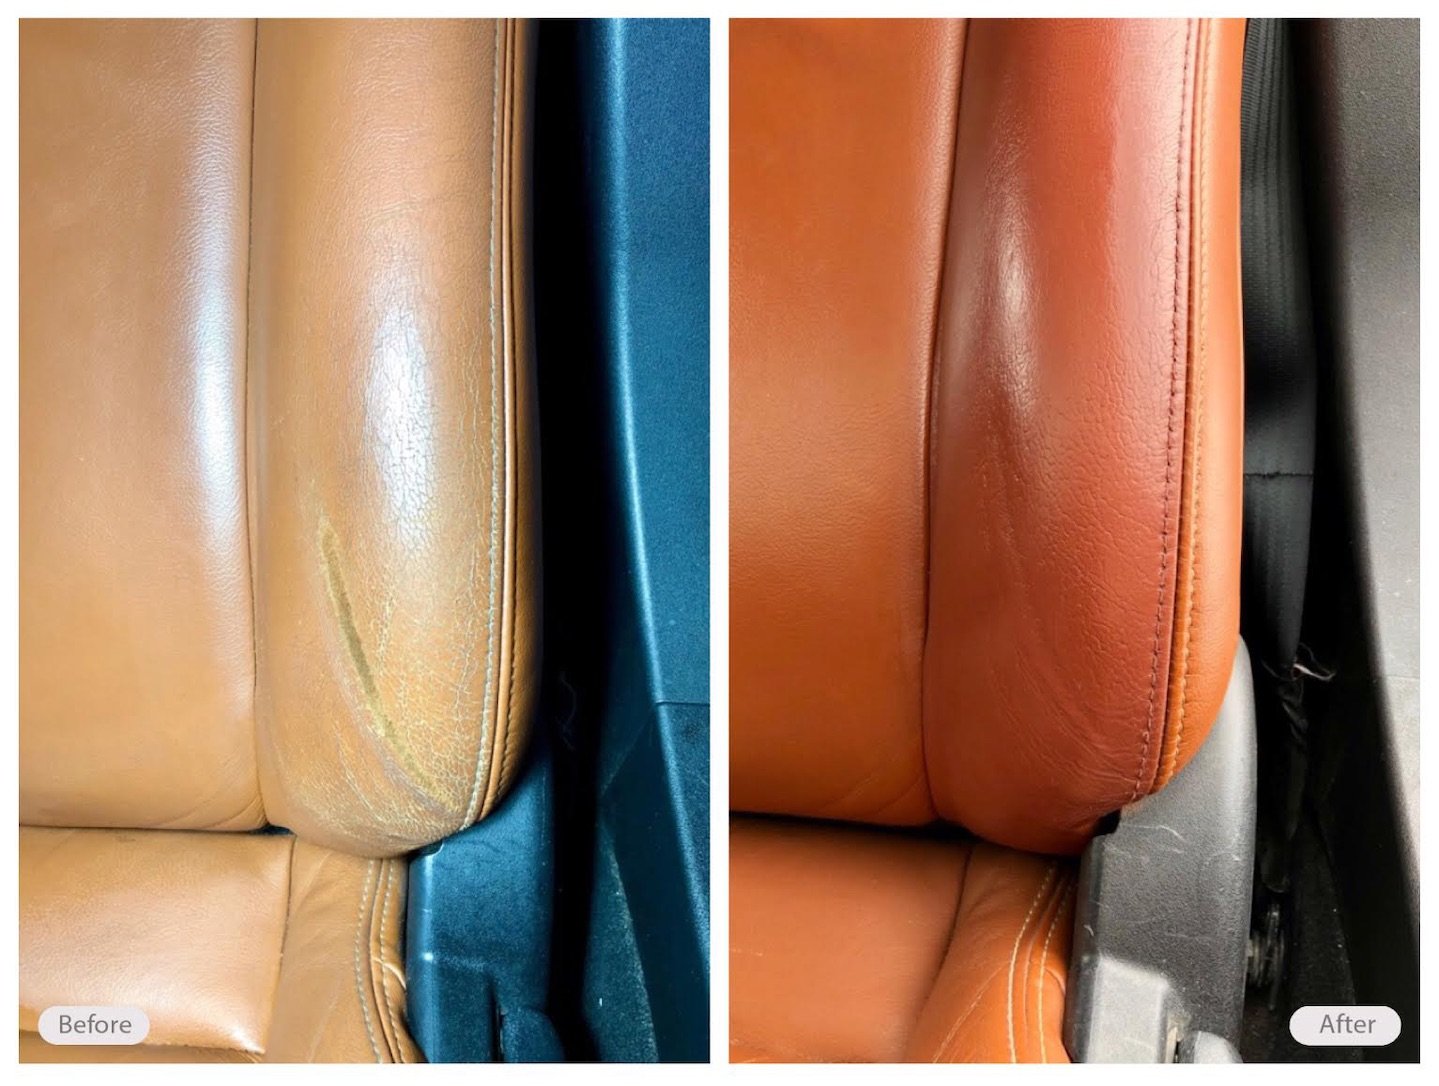 Repair/Restore Cracking, Scaly, Sun-Damaged Leather or Vinyl